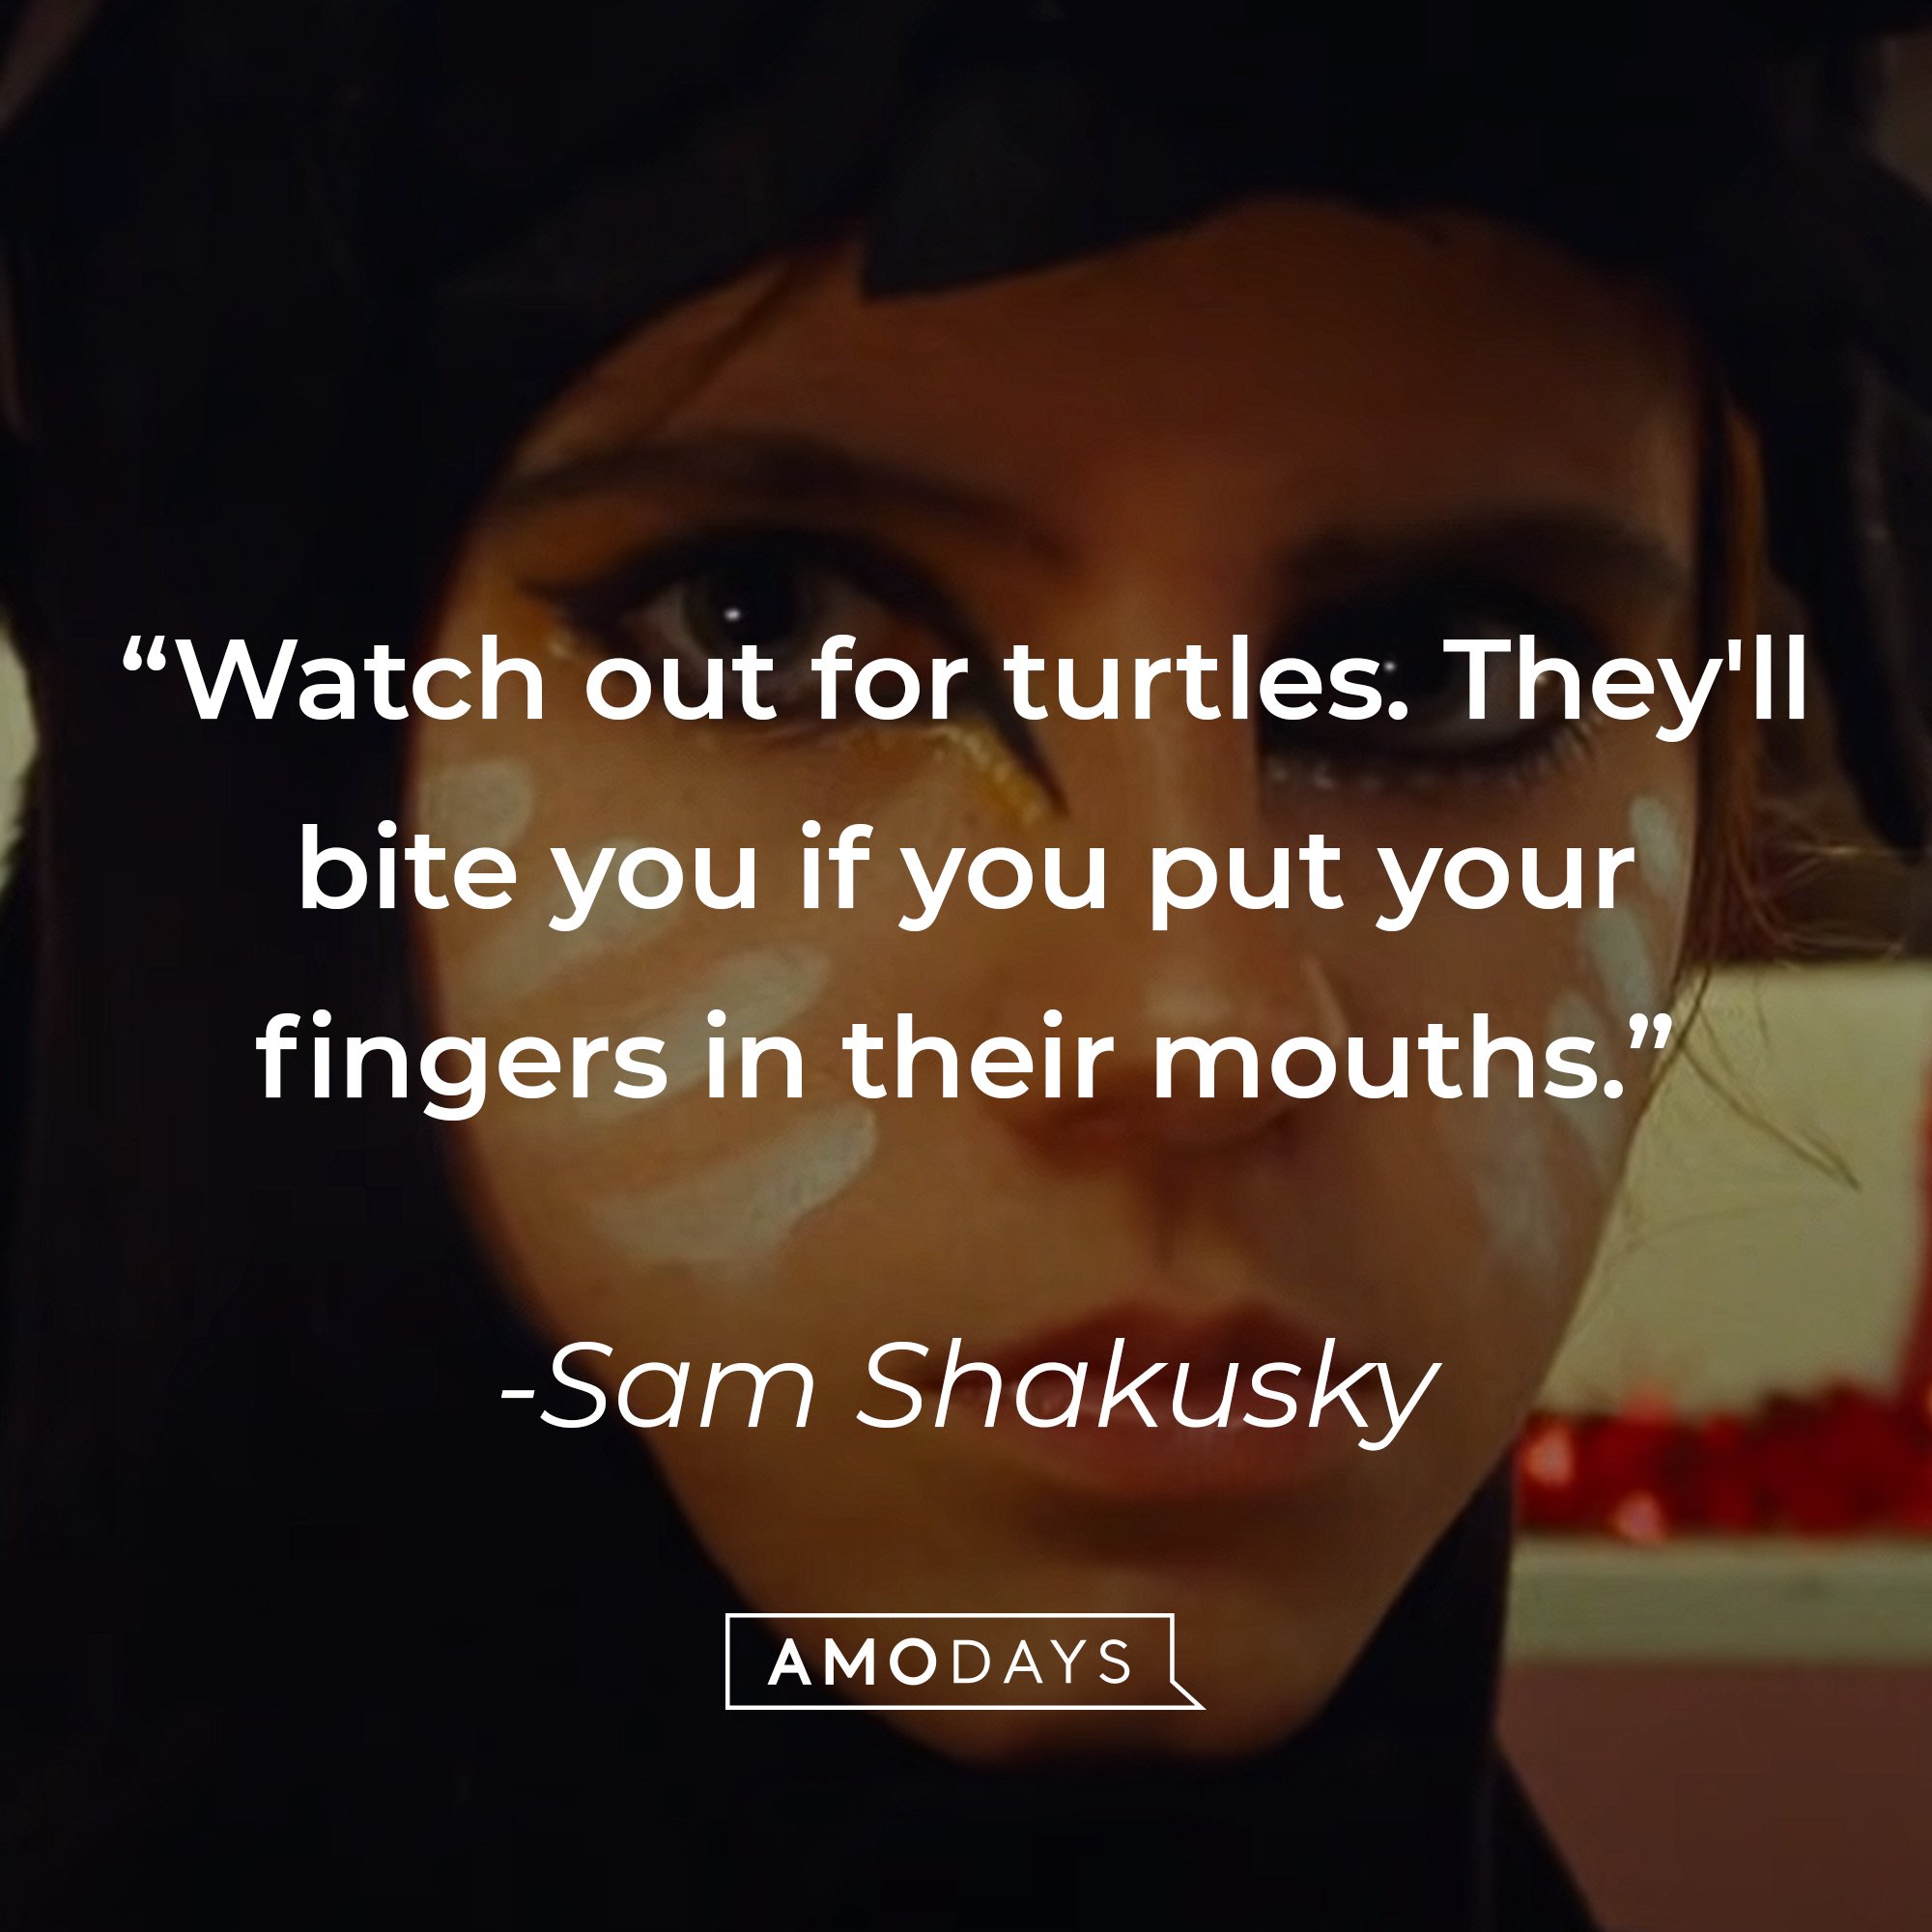 Sam Shakusky's quote: "Watch out for turtles. They'll bite you if you put your fingers in their mouths." | Image: AmoDays